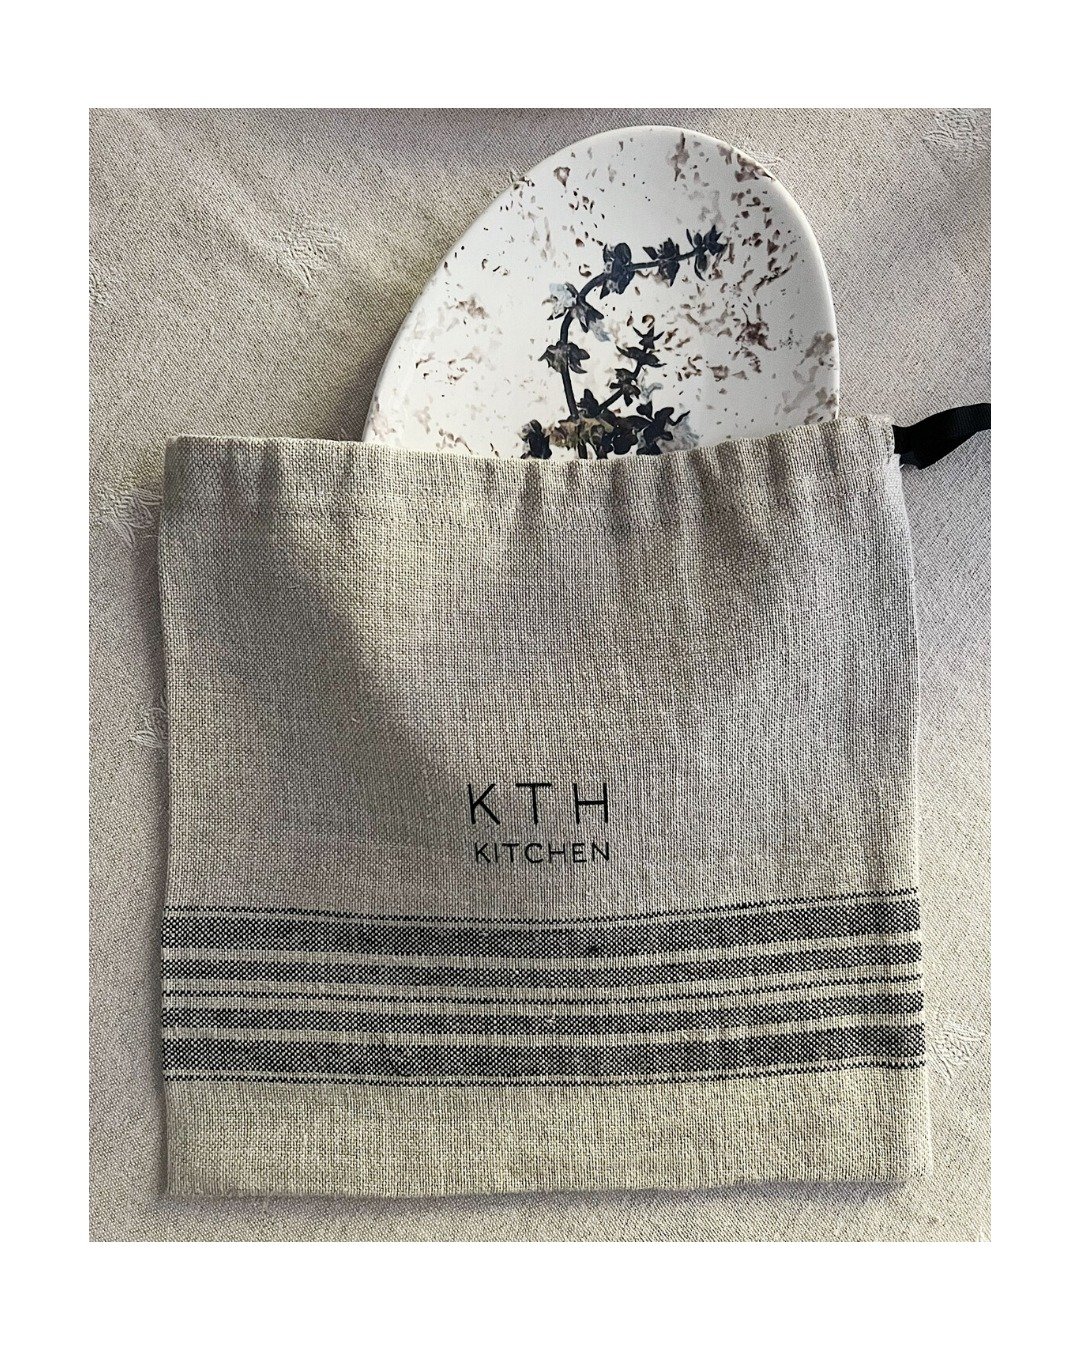 Reusable French Linen Bag with each KTH Kitchen Ceramic